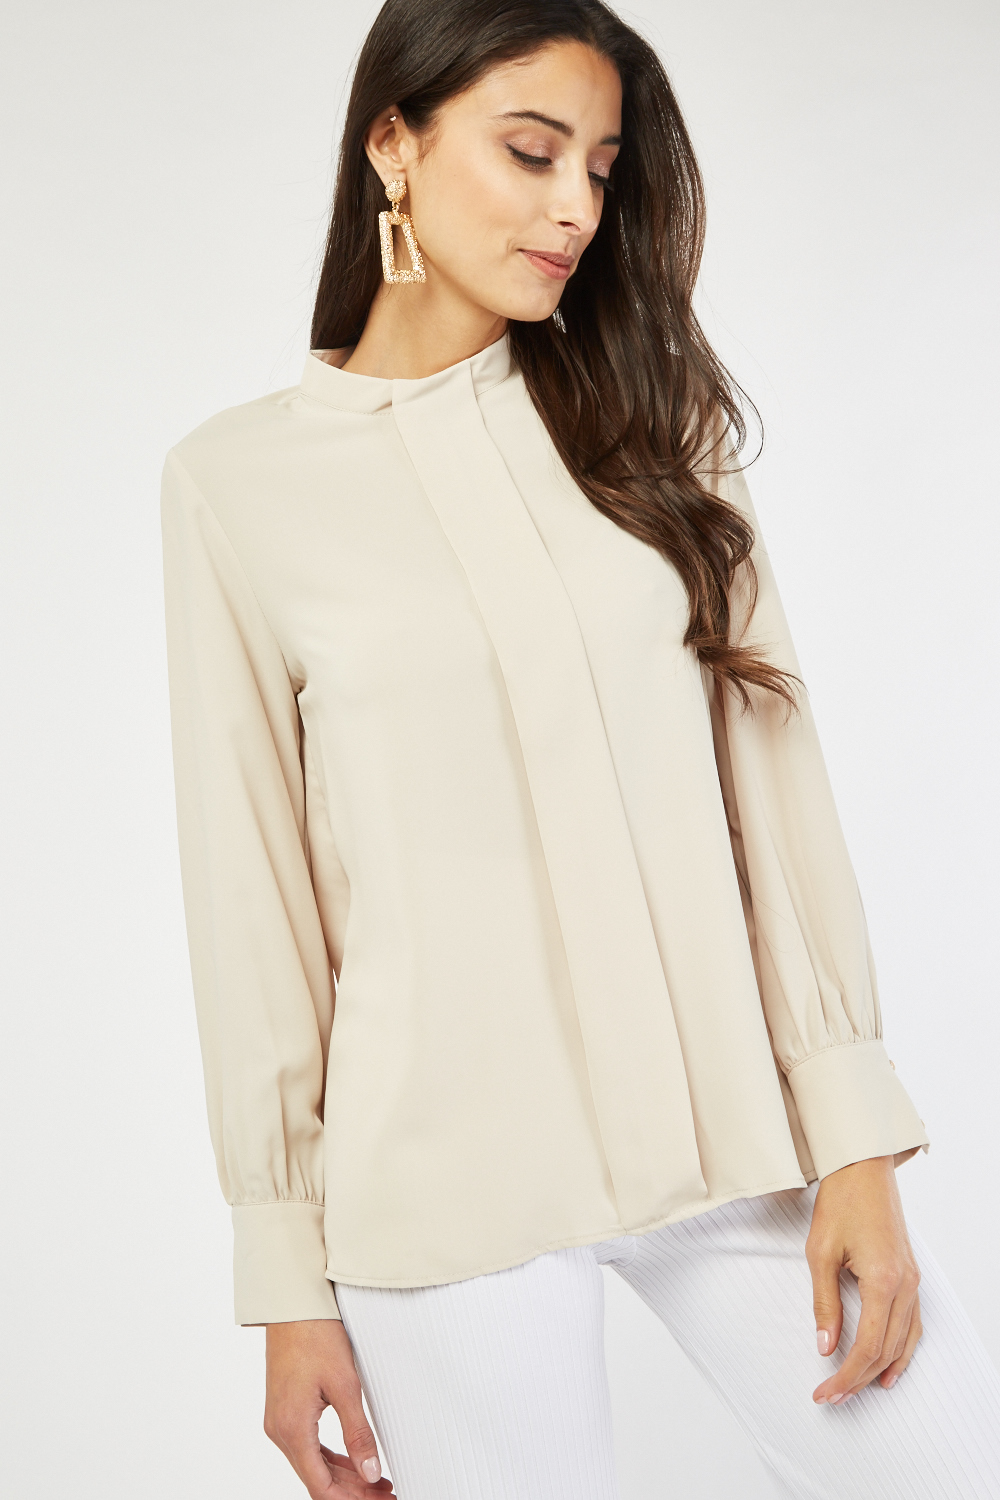 Pleated Front Silky Blouse - Just $7